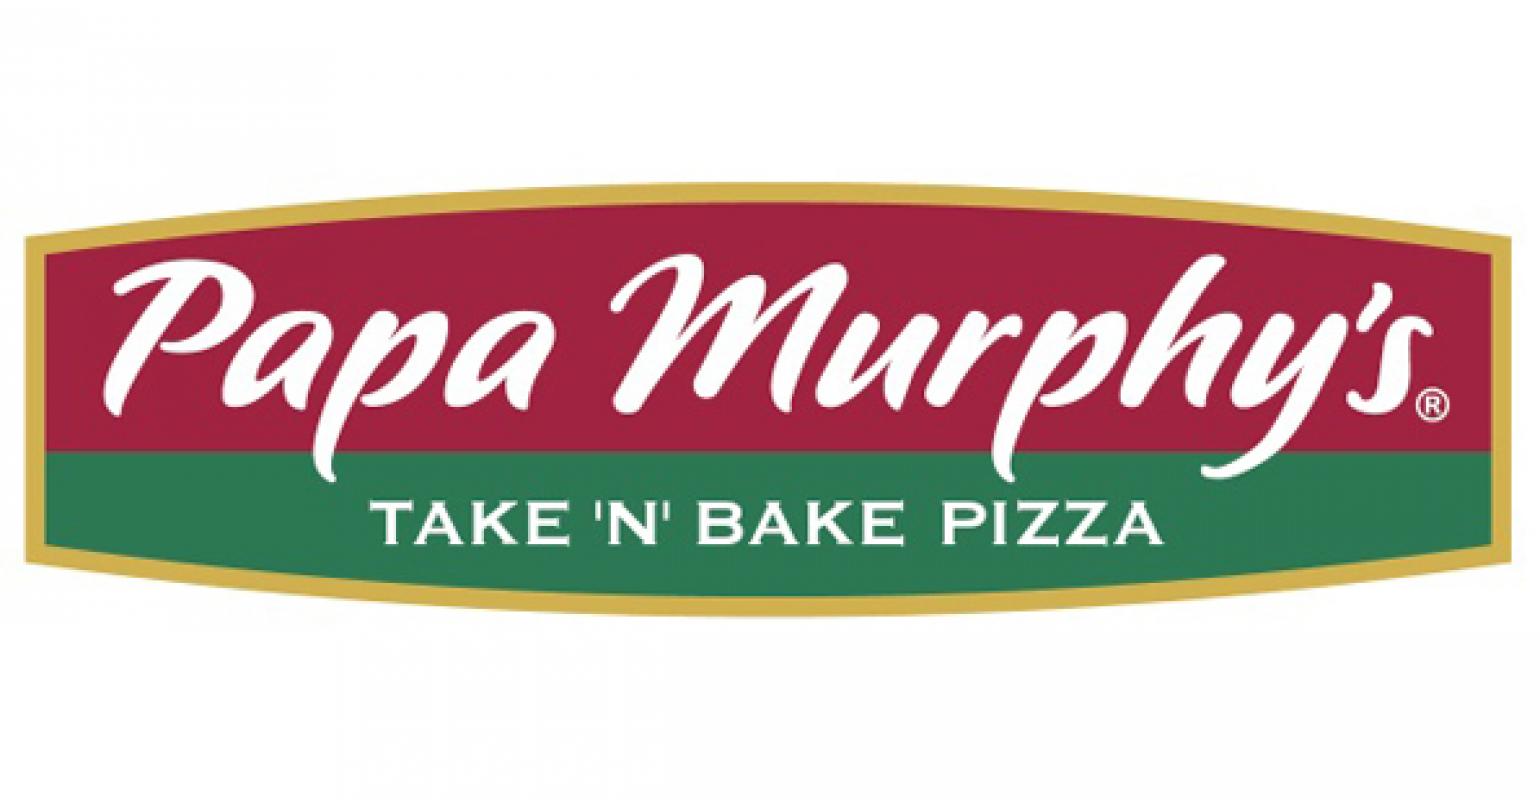 Shopping centers home to IHOP, Papa Murphy's sold